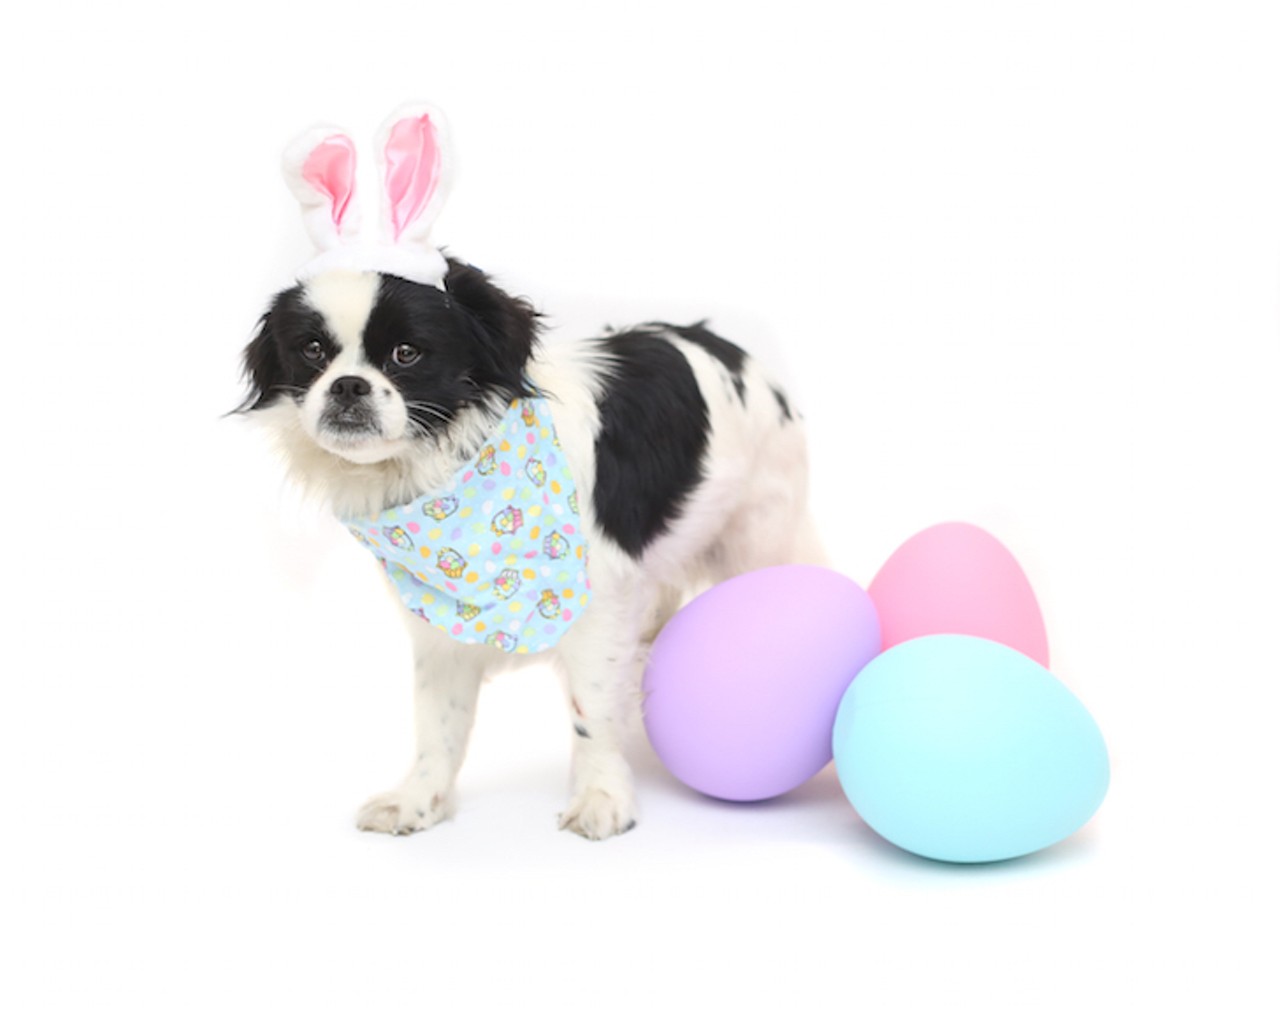 19 adoptable dogs that are cuter than the Easter bunny